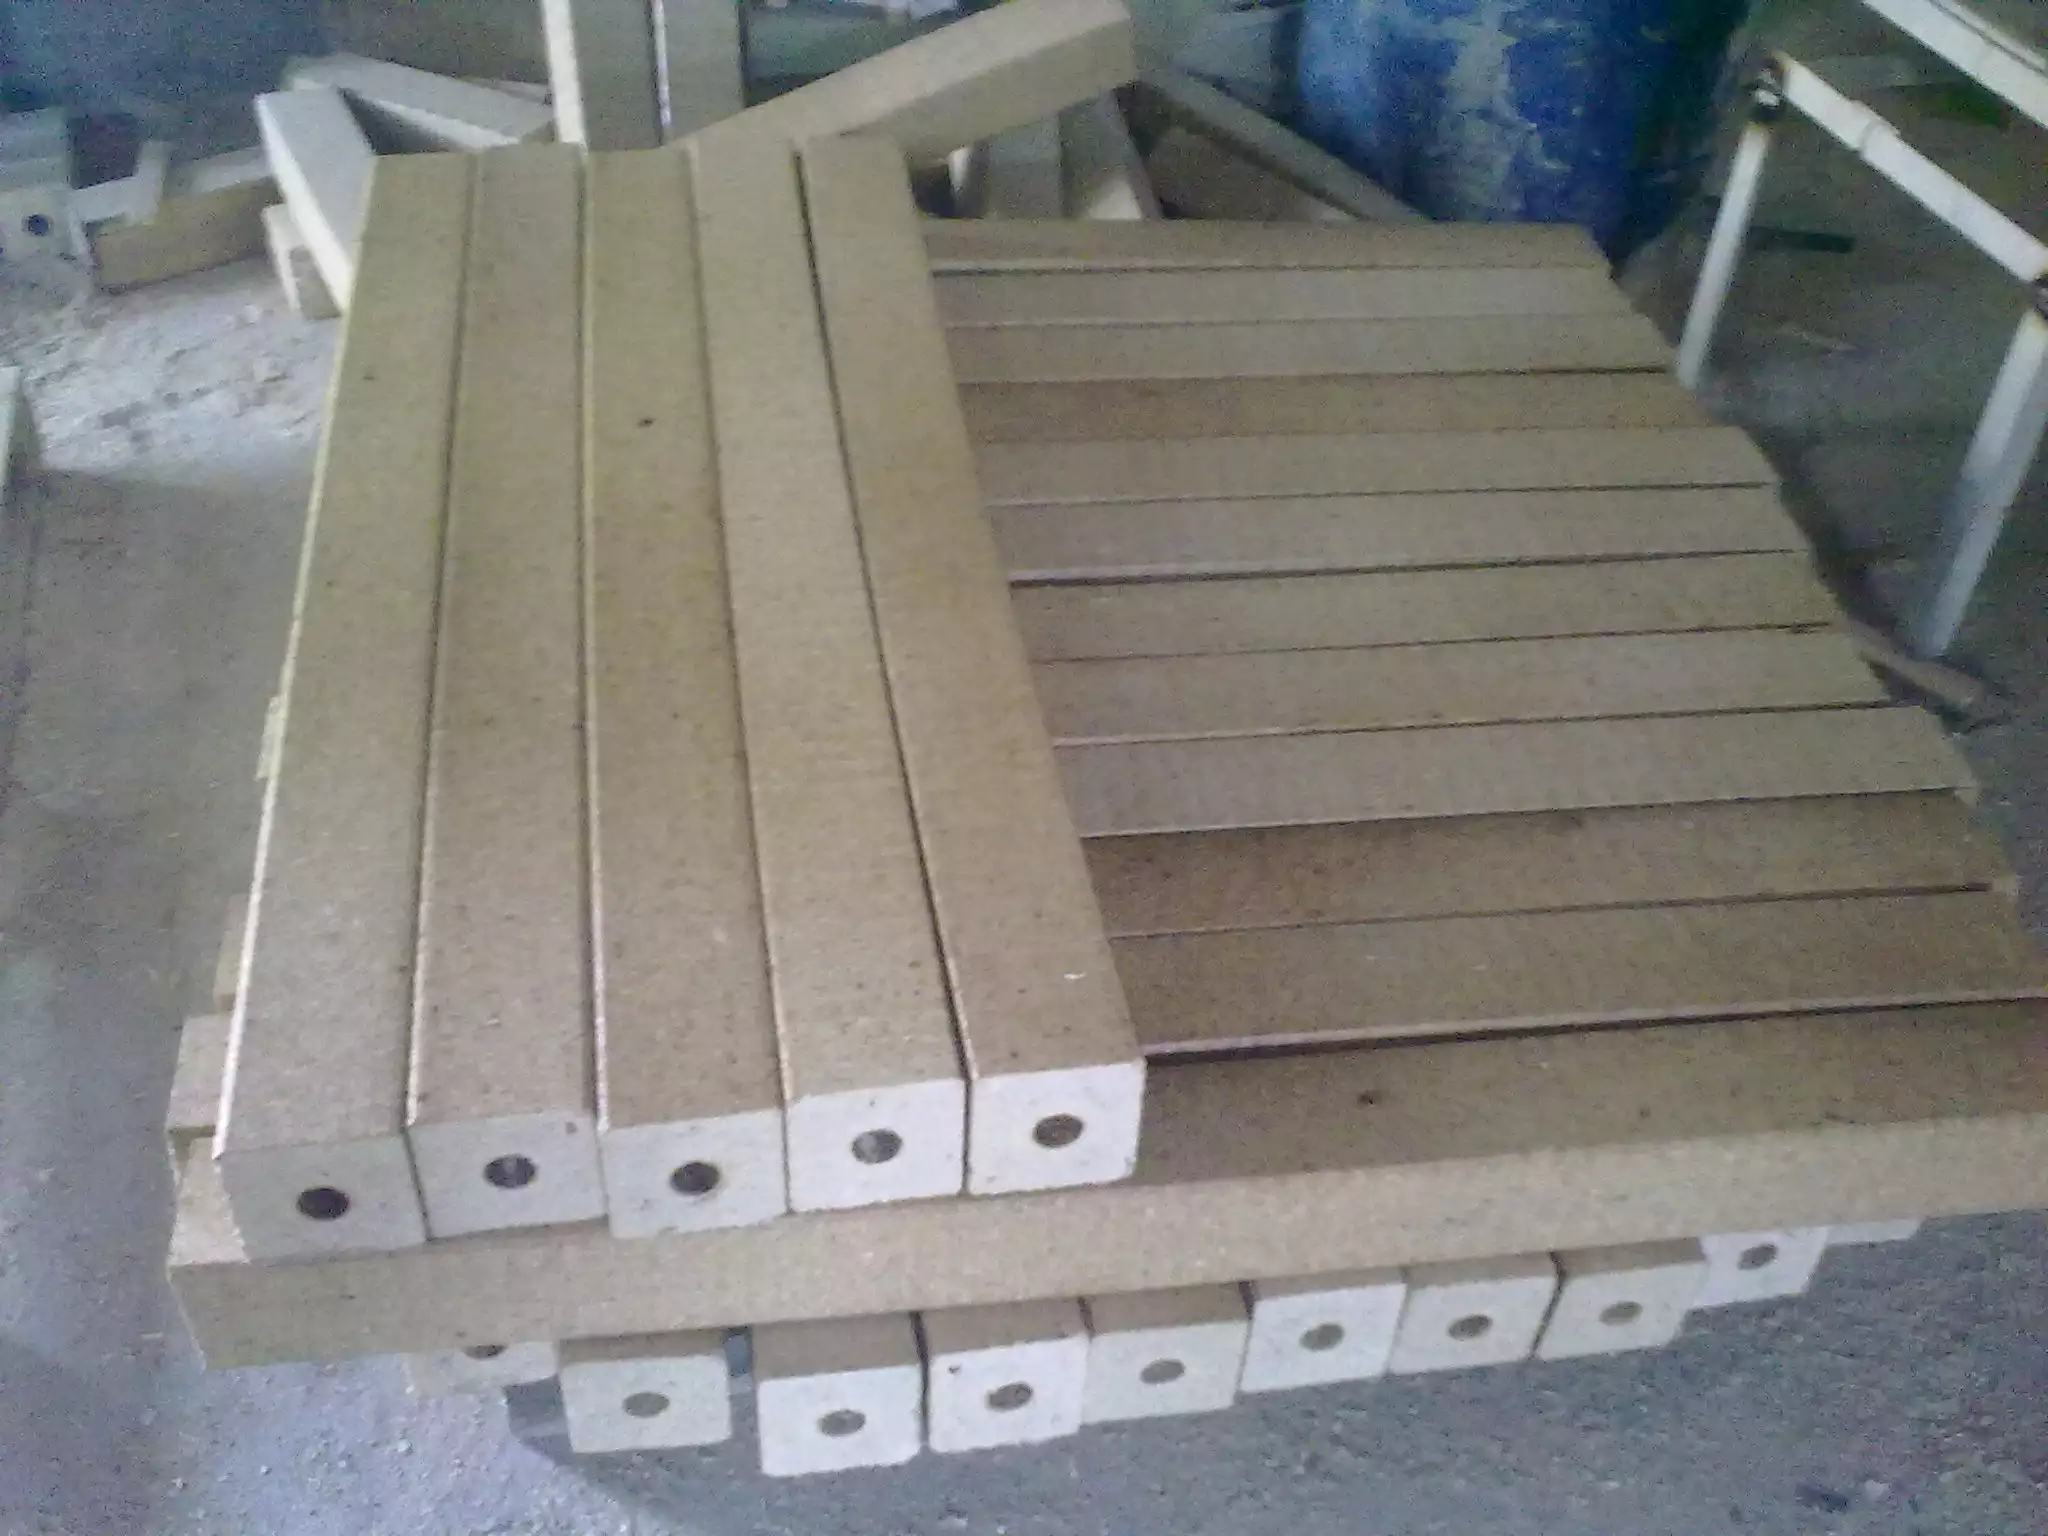 Specifications and sizes of wooden pallet blocks